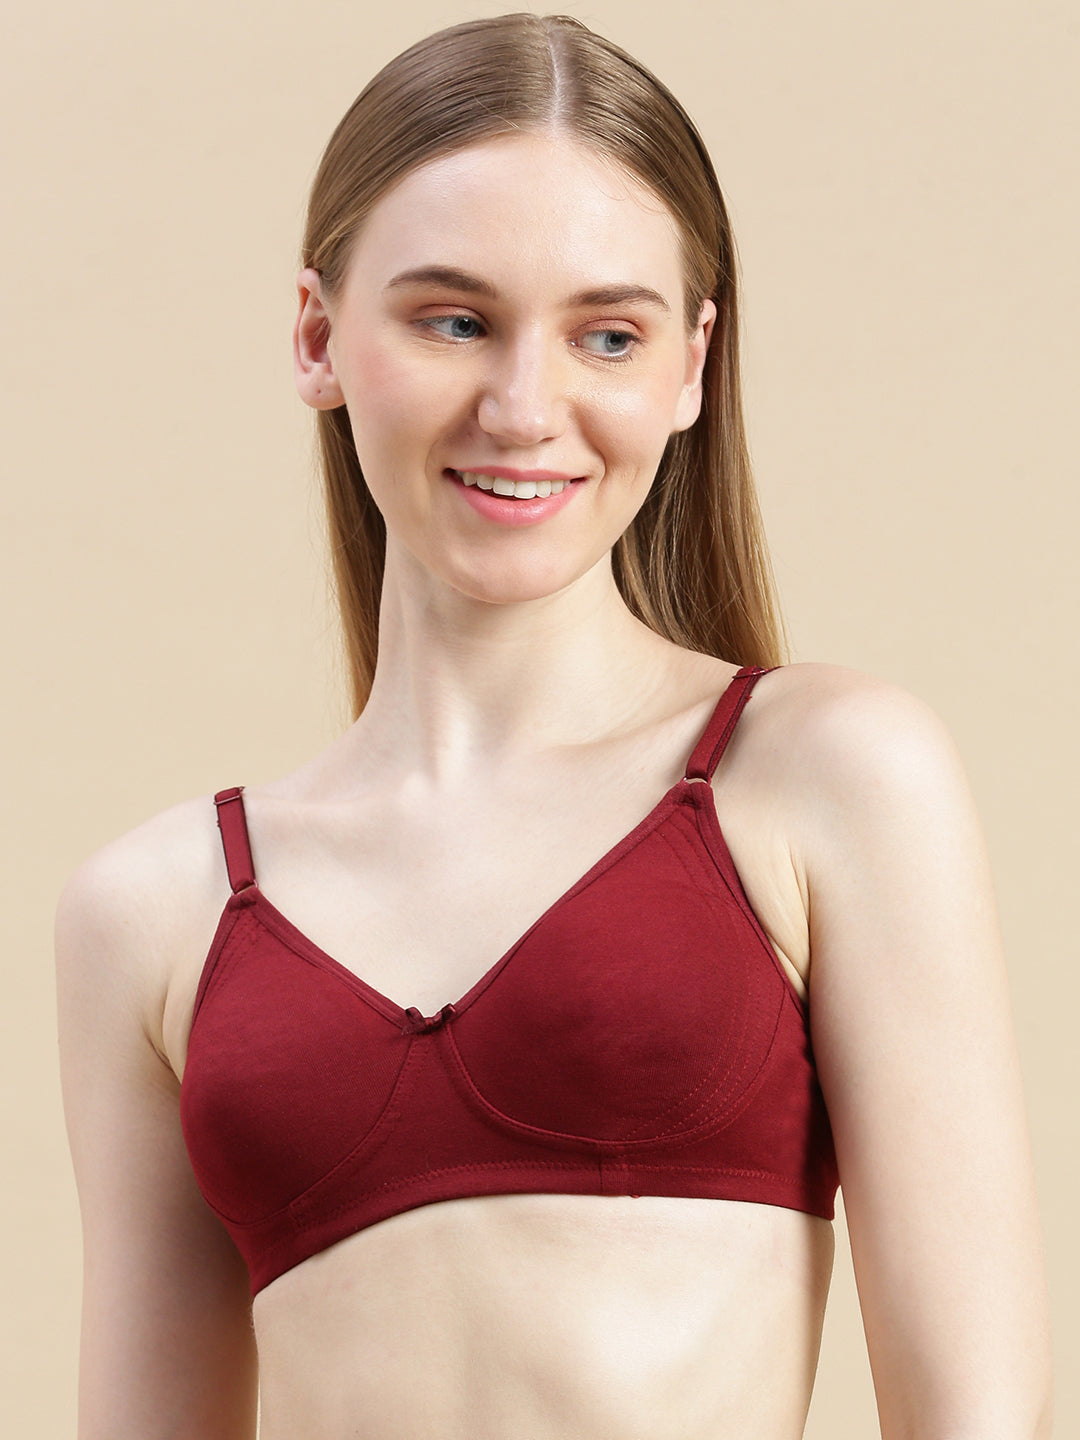 Buy Women's Bras - Comfortable and Stylish Brassieres